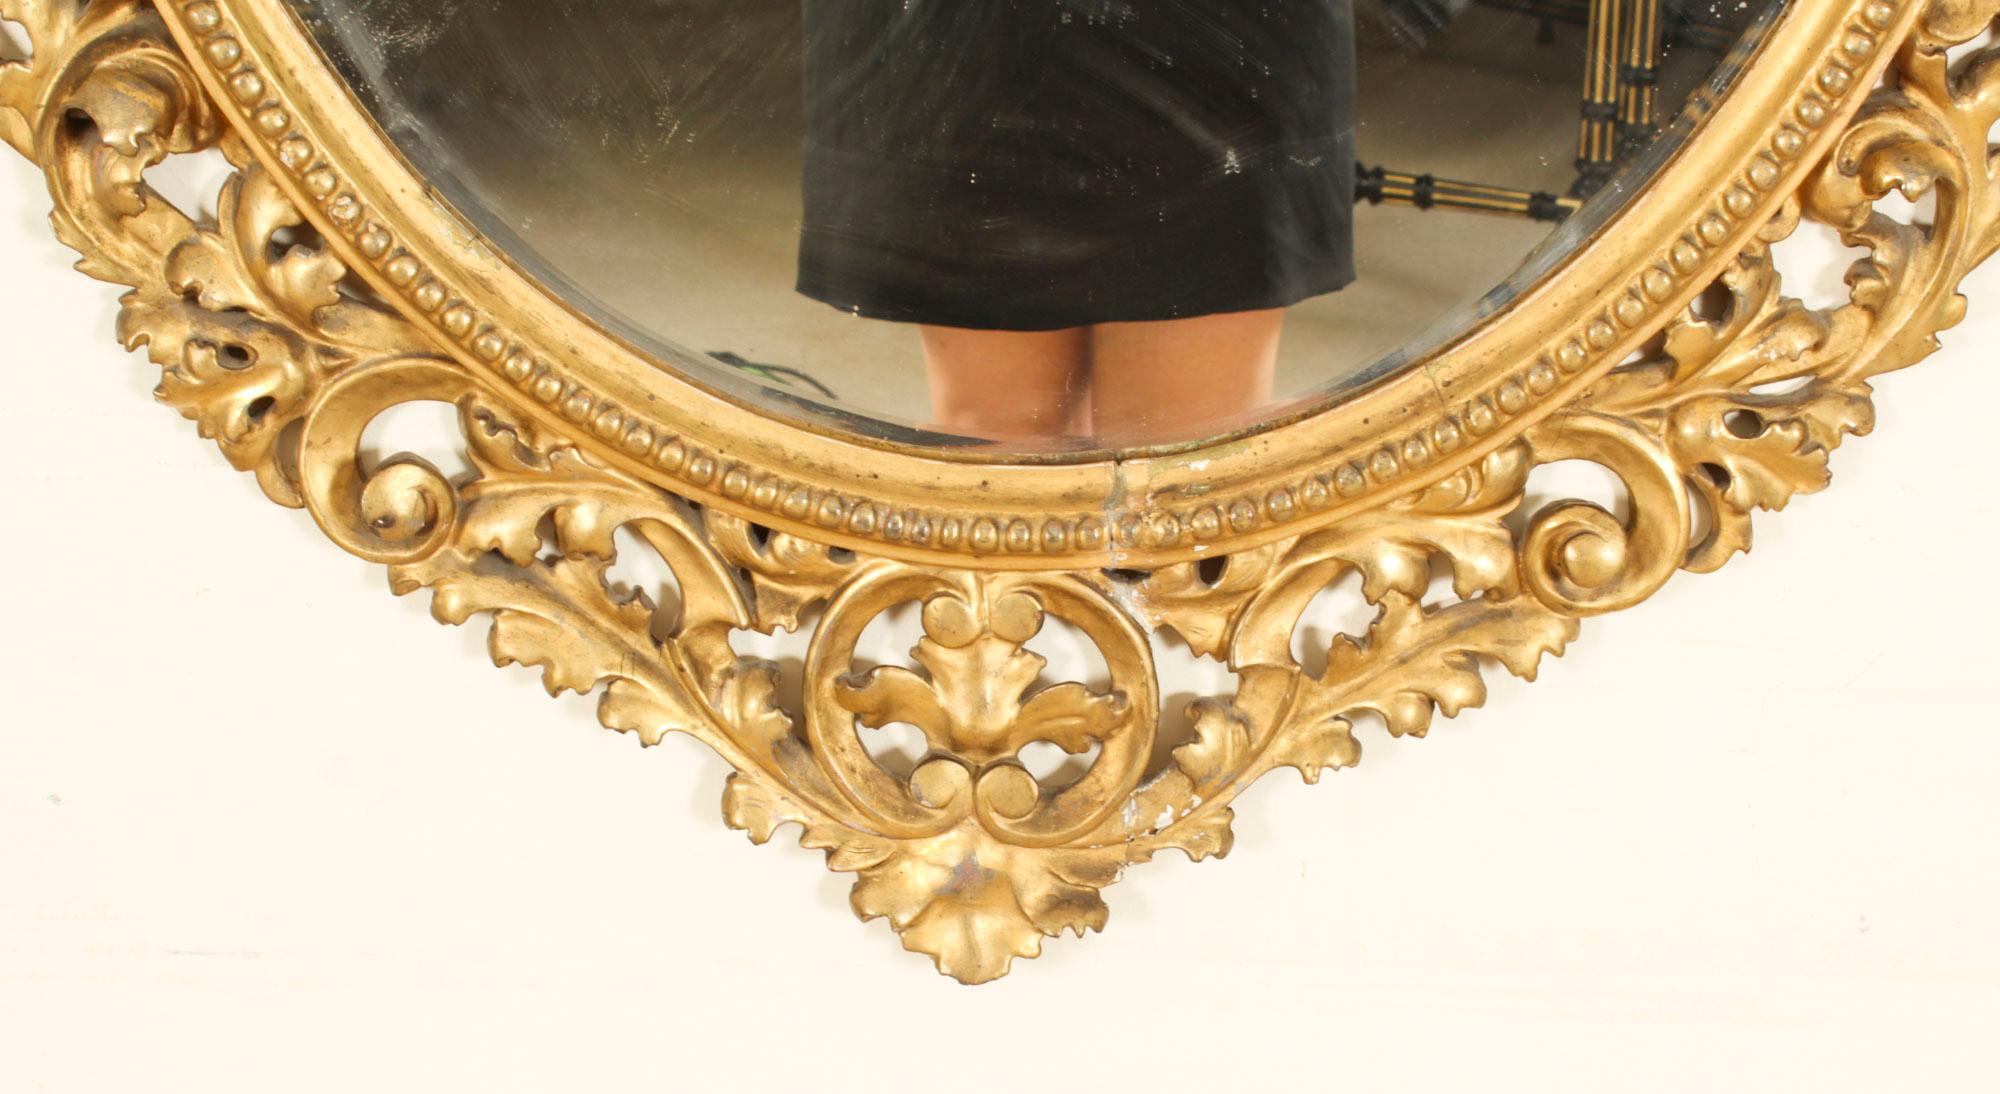 Antique Oval Florentine Giltwood Mirror 19th Century 120x92cm In Good Condition For Sale In London, GB